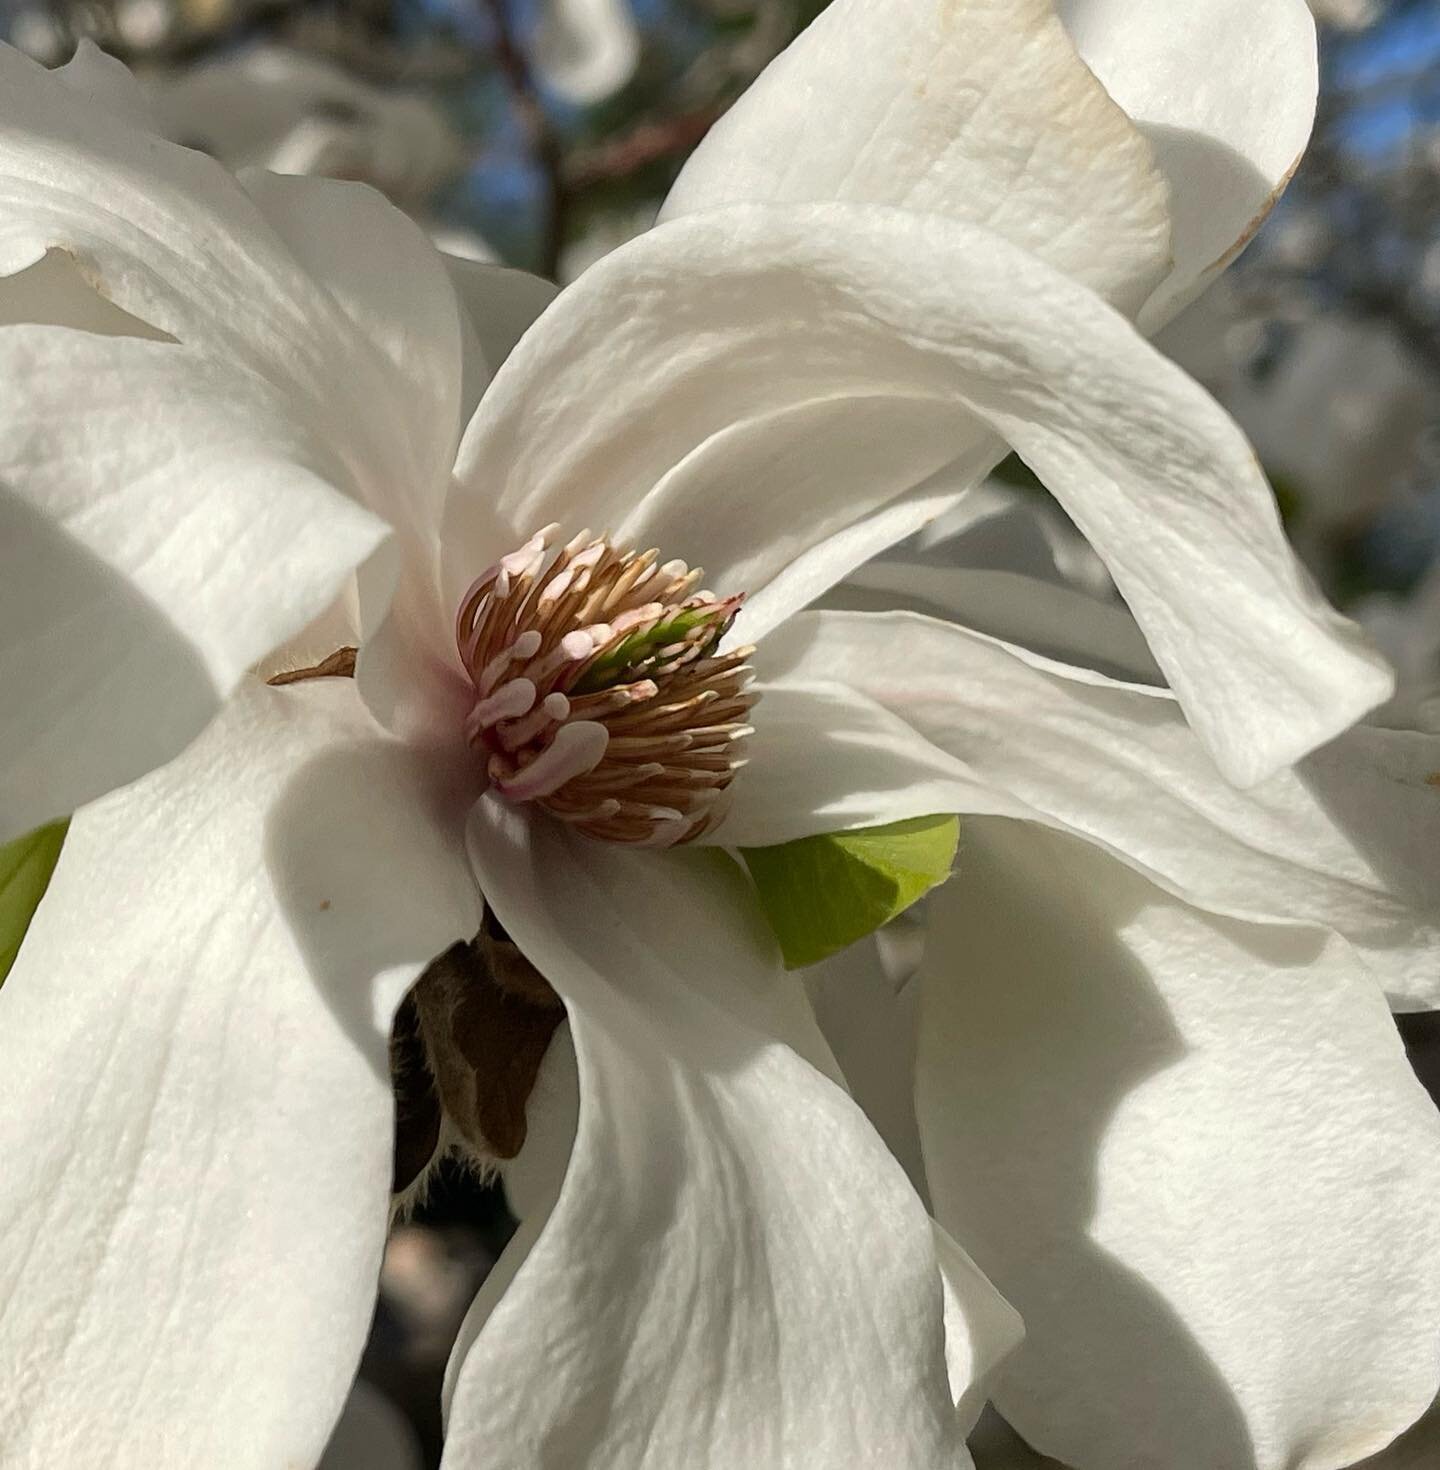 &hellip;Merrill Magnolia having a good year&hellip; sorry not to post the scent&hellip; ❤️
#spring #vermontspring #april #Vermont